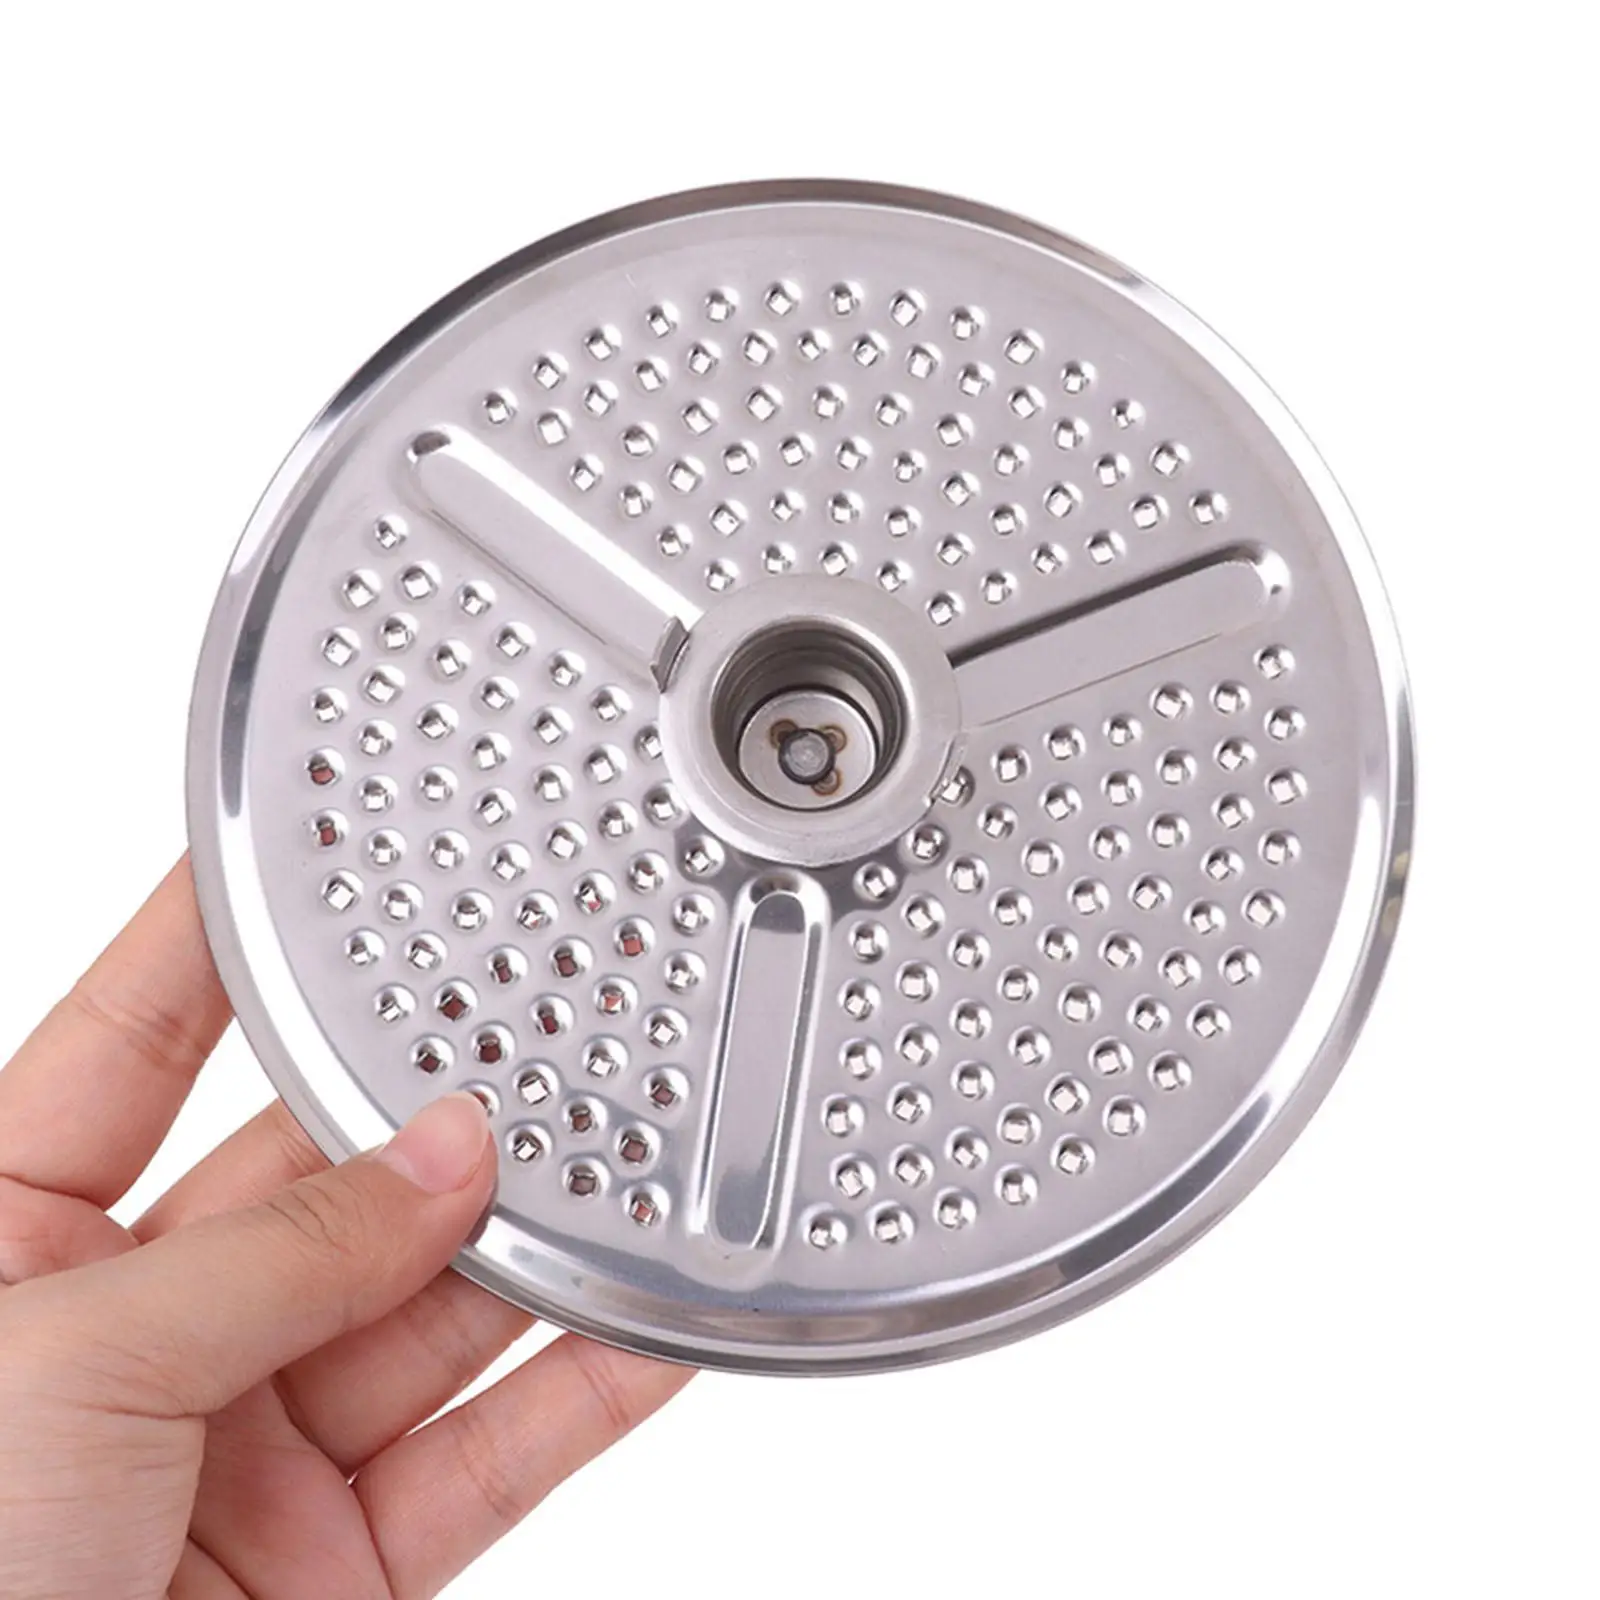 Slicing Disc for Food Processor Durable Stainless Steel Accessories Sturdy Practical Peeling Disc for TM6 Blender